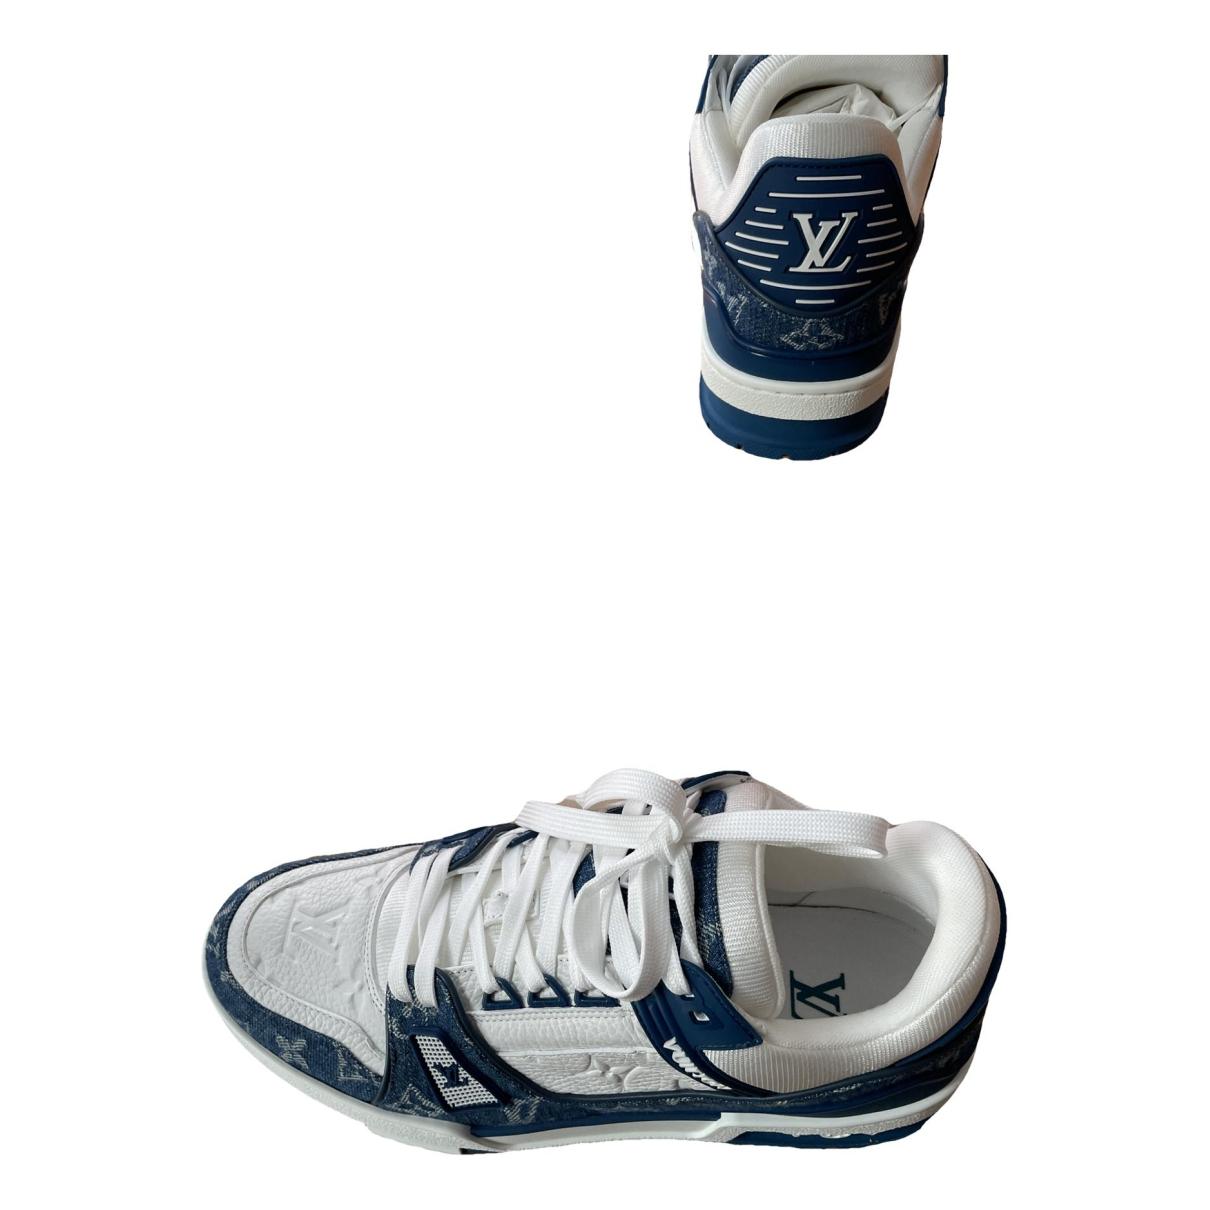 Lv trainer leather low trainers Louis Vuitton Blue size 41.5 EU in Leather  - 34958141